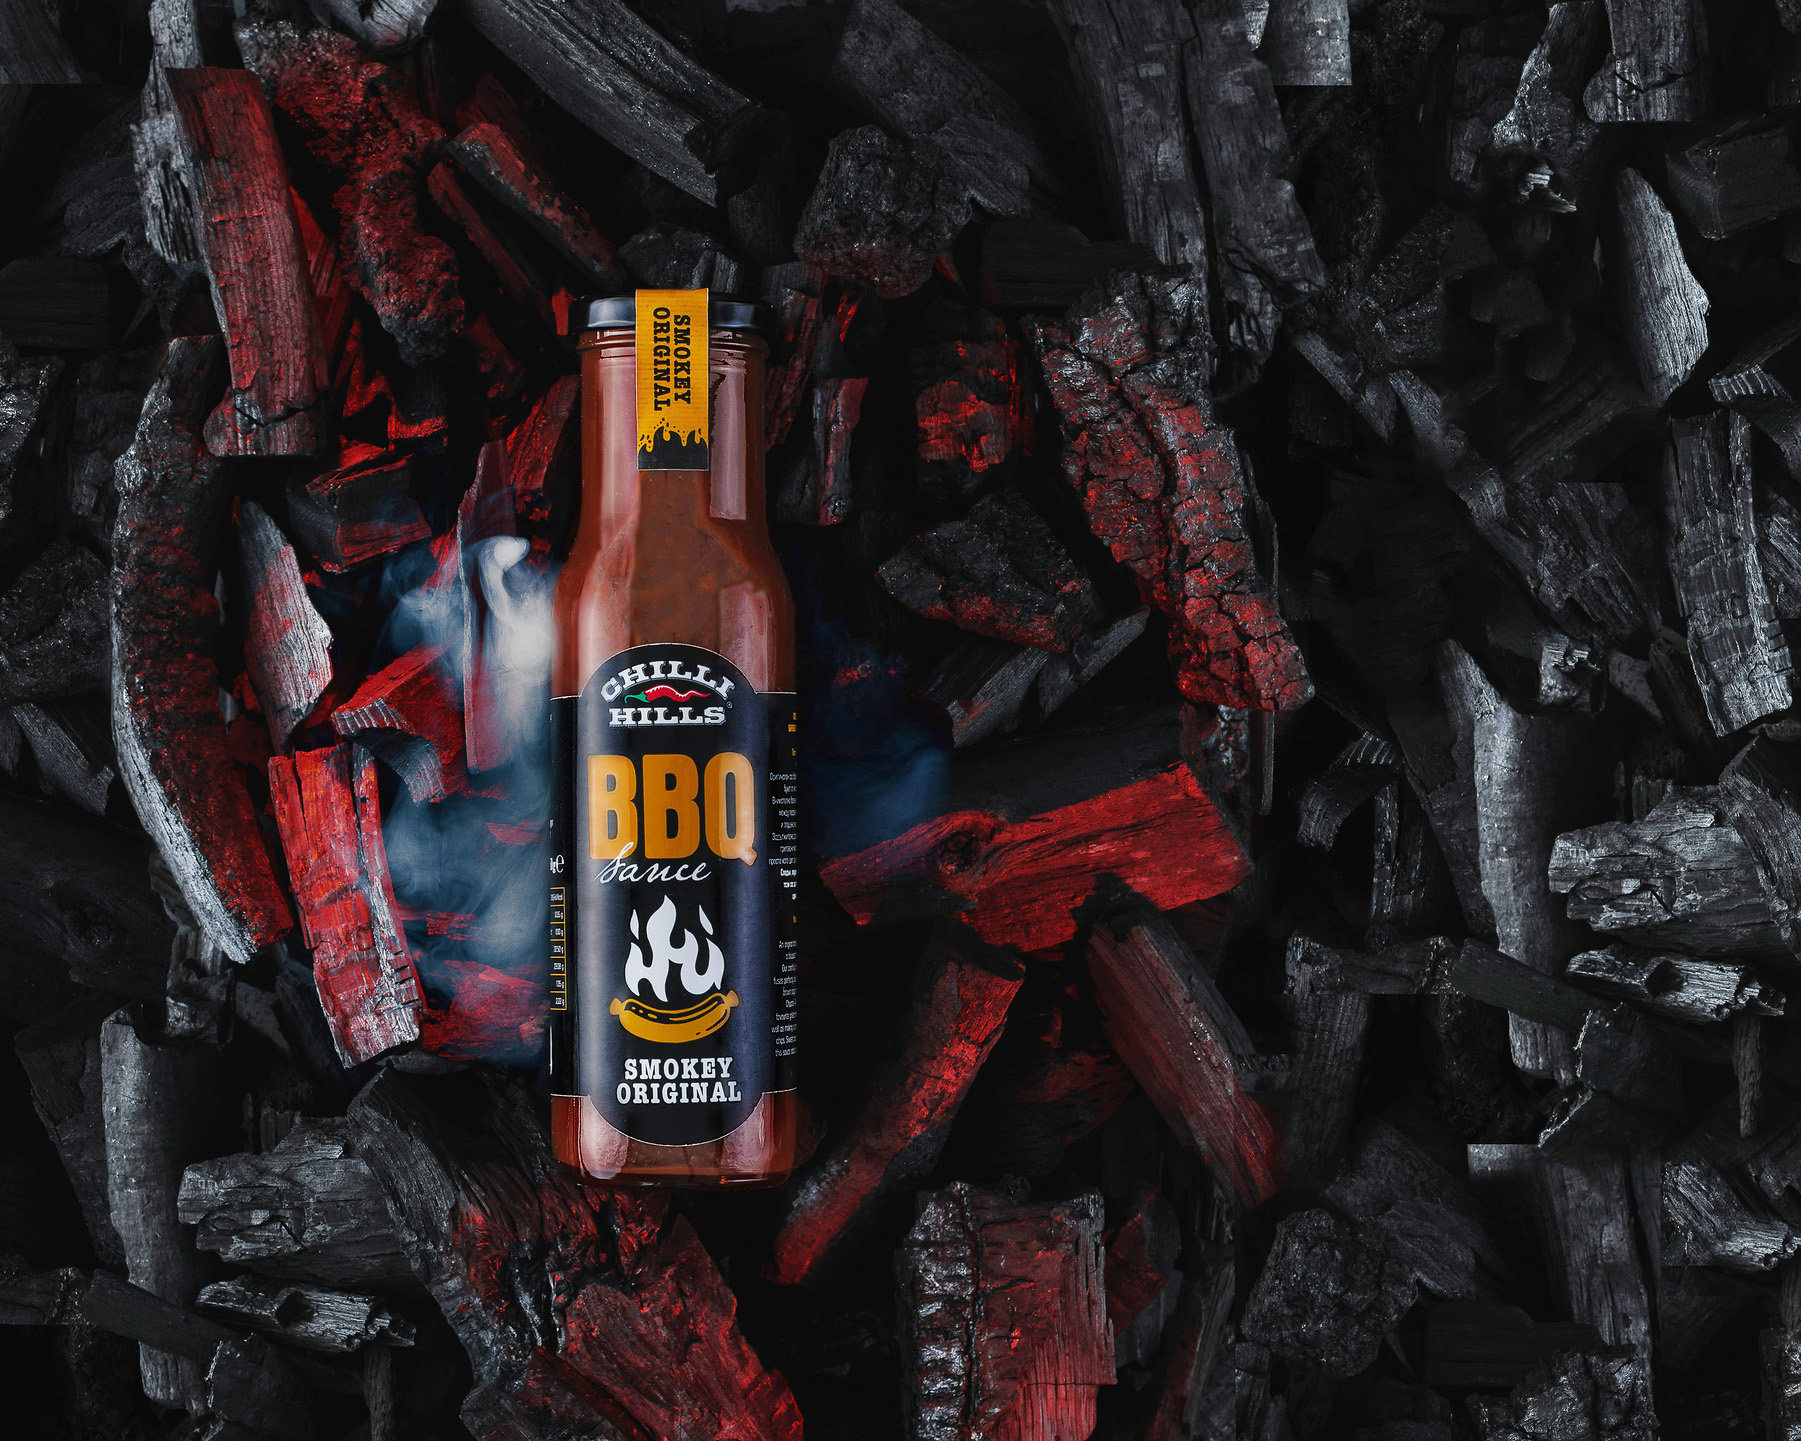 Ketchup Chilli Hills - BBQ Smokey Original. Charcoal surrounds a bottle with ketchup. There is a red glow around imitating the fire and heat.